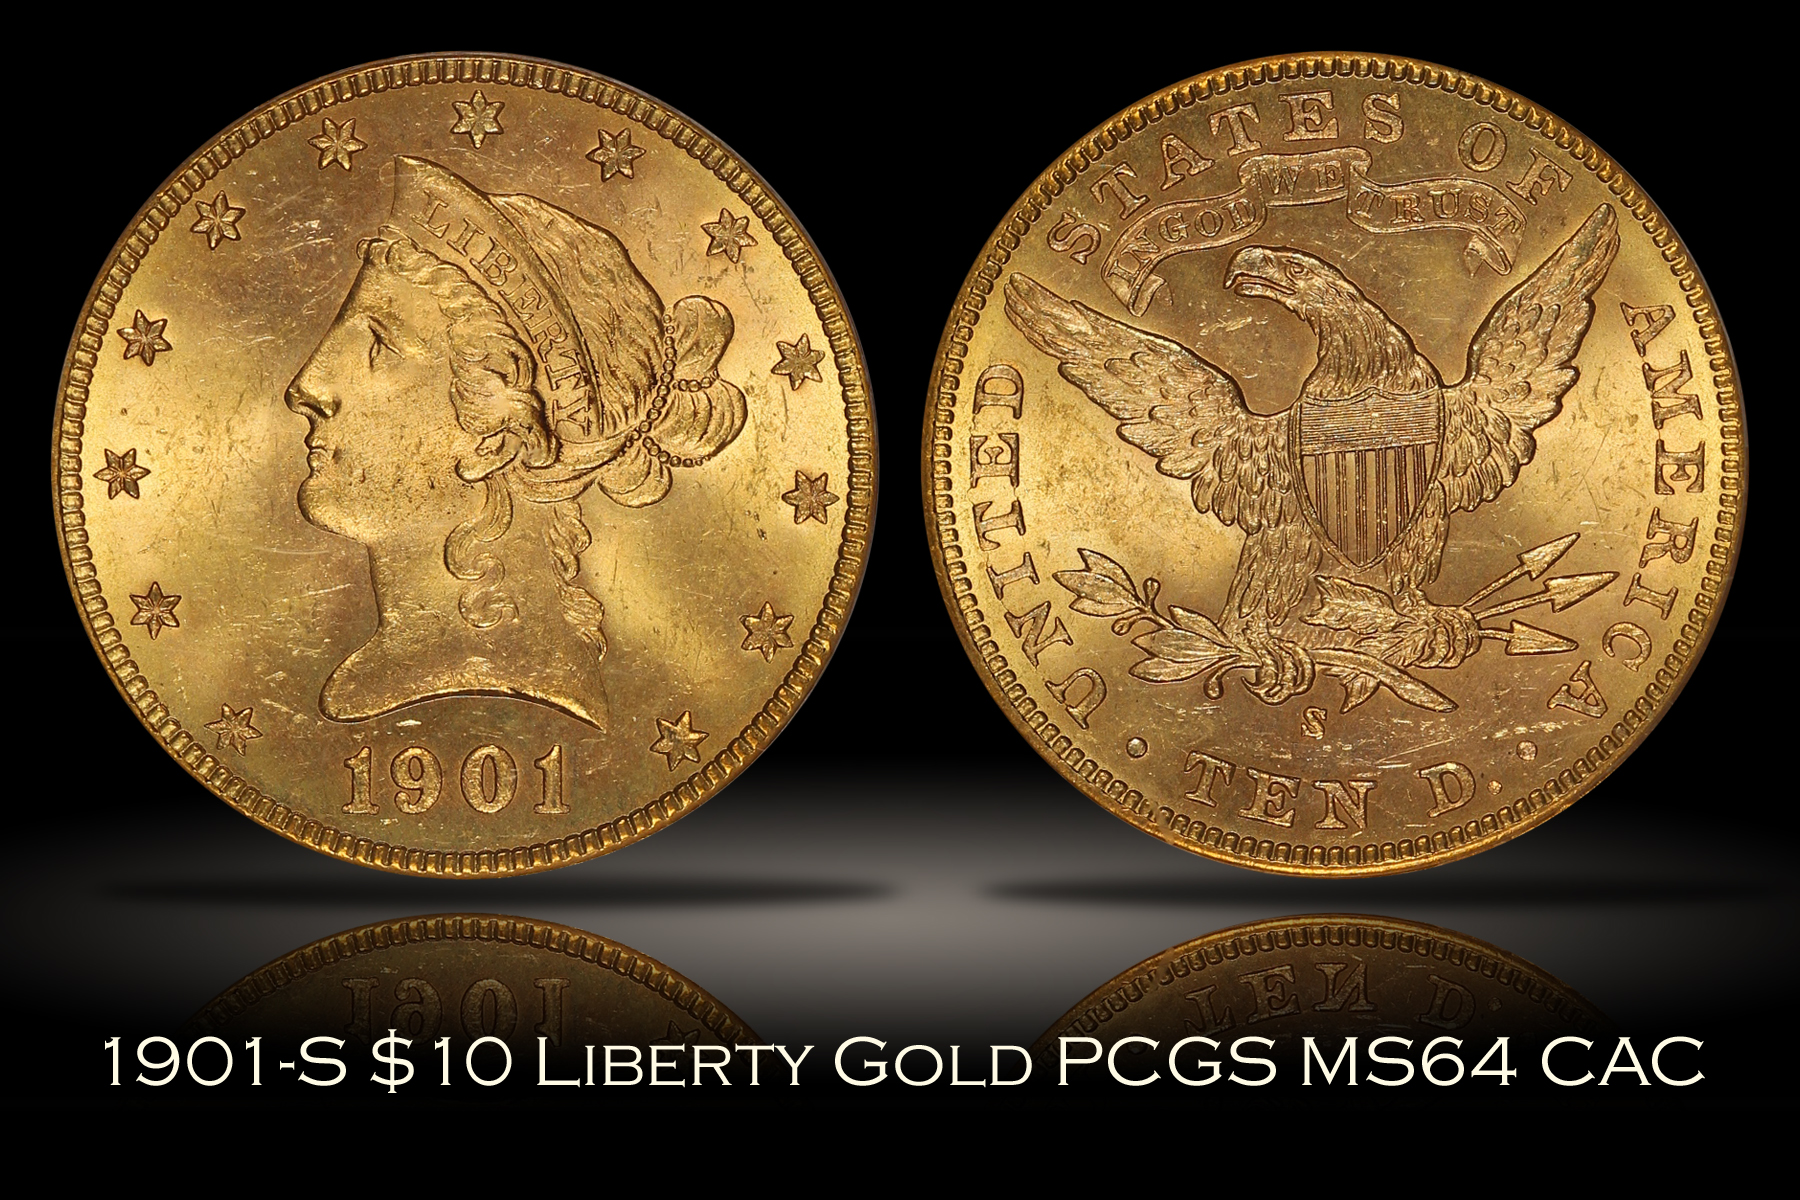 1901-S $10 Liberty Gold PCGS MS64 OGH CAC